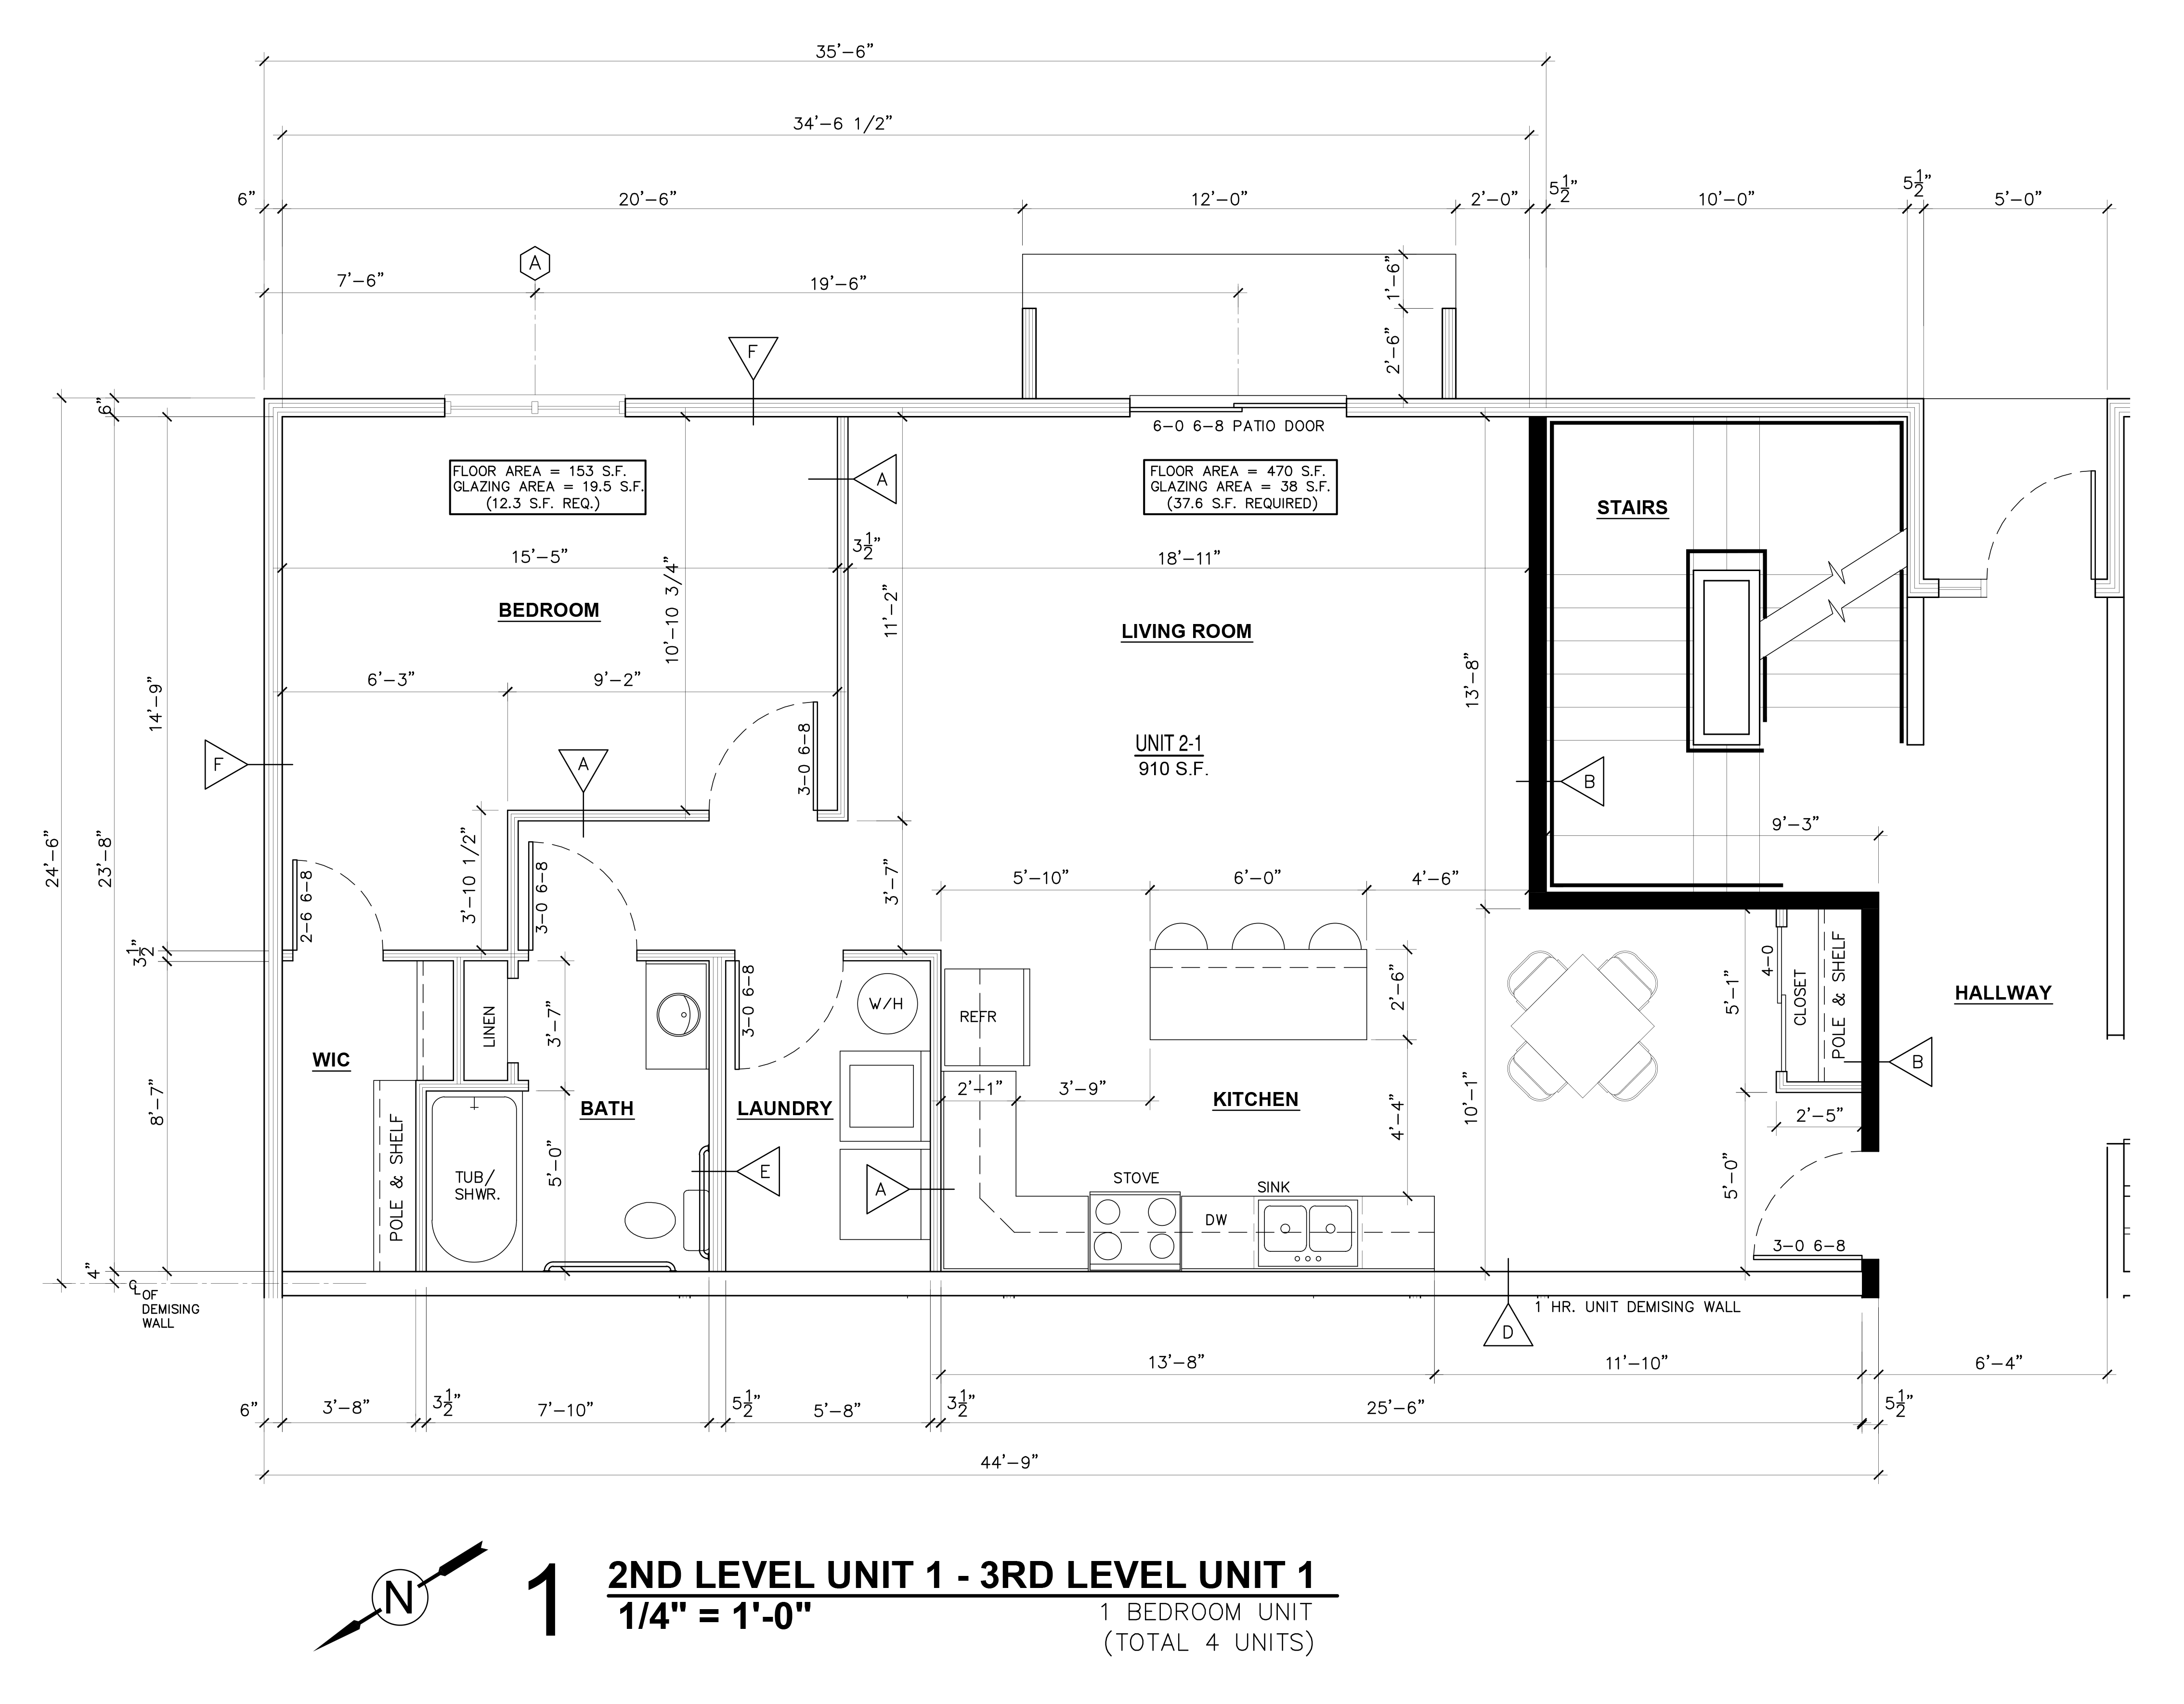 Hawks Nest Apartments 2nd and 3rd level unit 1 floor plan